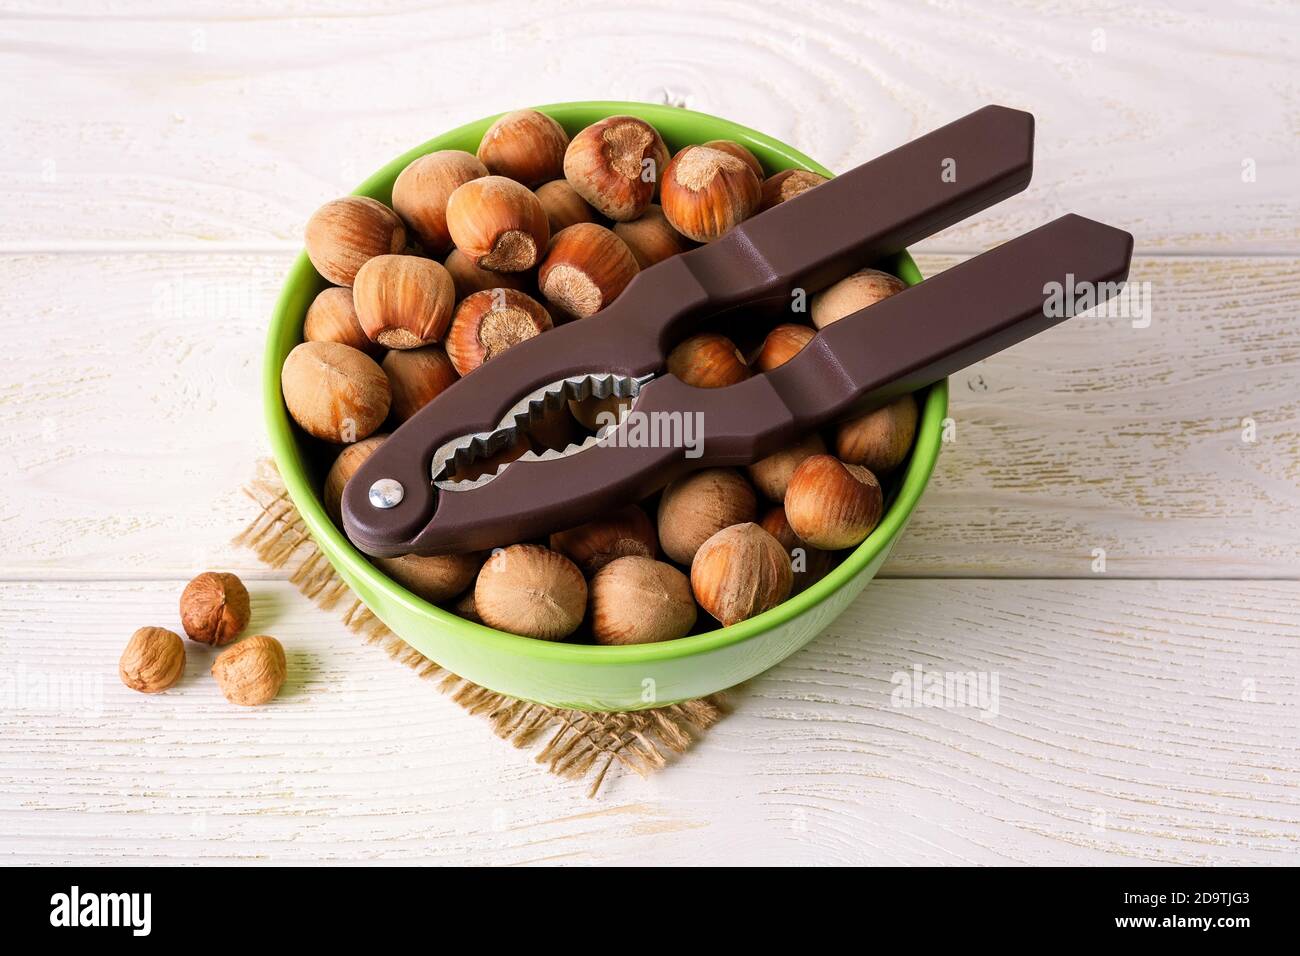 Brown nut cracker on a green bowl full of unpeeled hazelnuts over white wood table. Antioxidant and protein source for ketogenic and raw food diets. Stock Photo